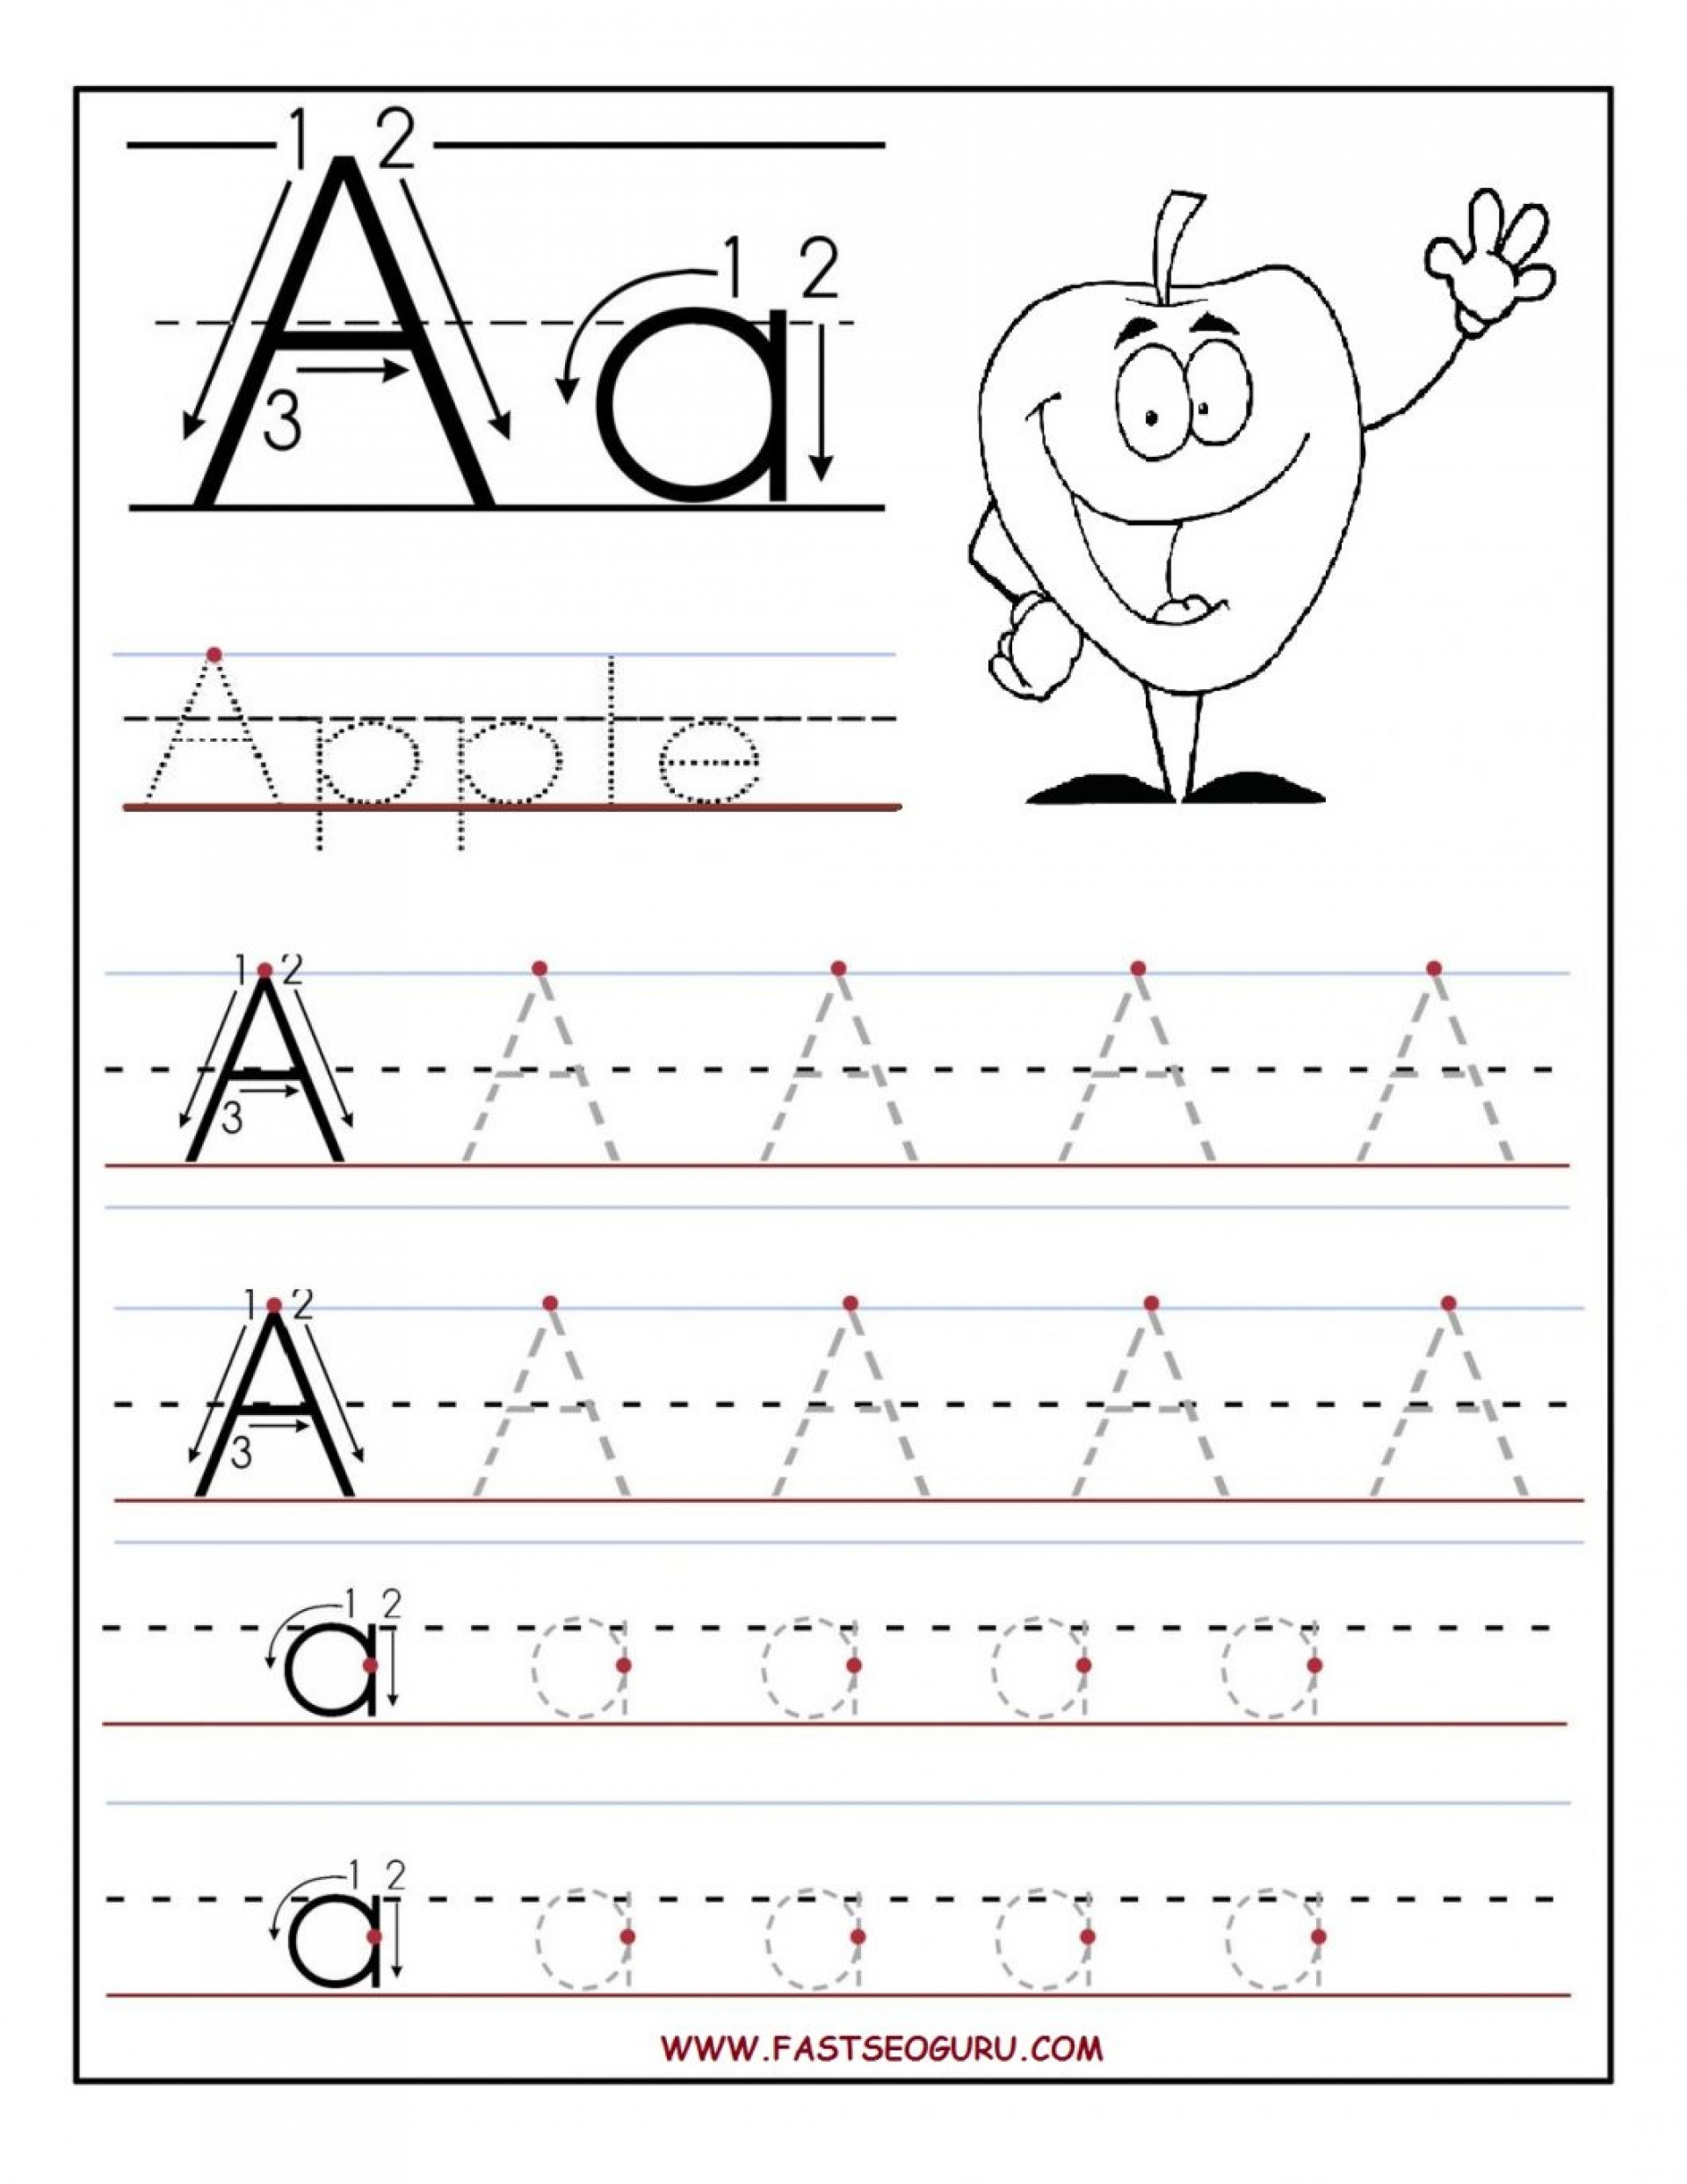 Coloring Book : Coloring Book Worksheet Trace Letters for Trace Letter A Worksheets Free